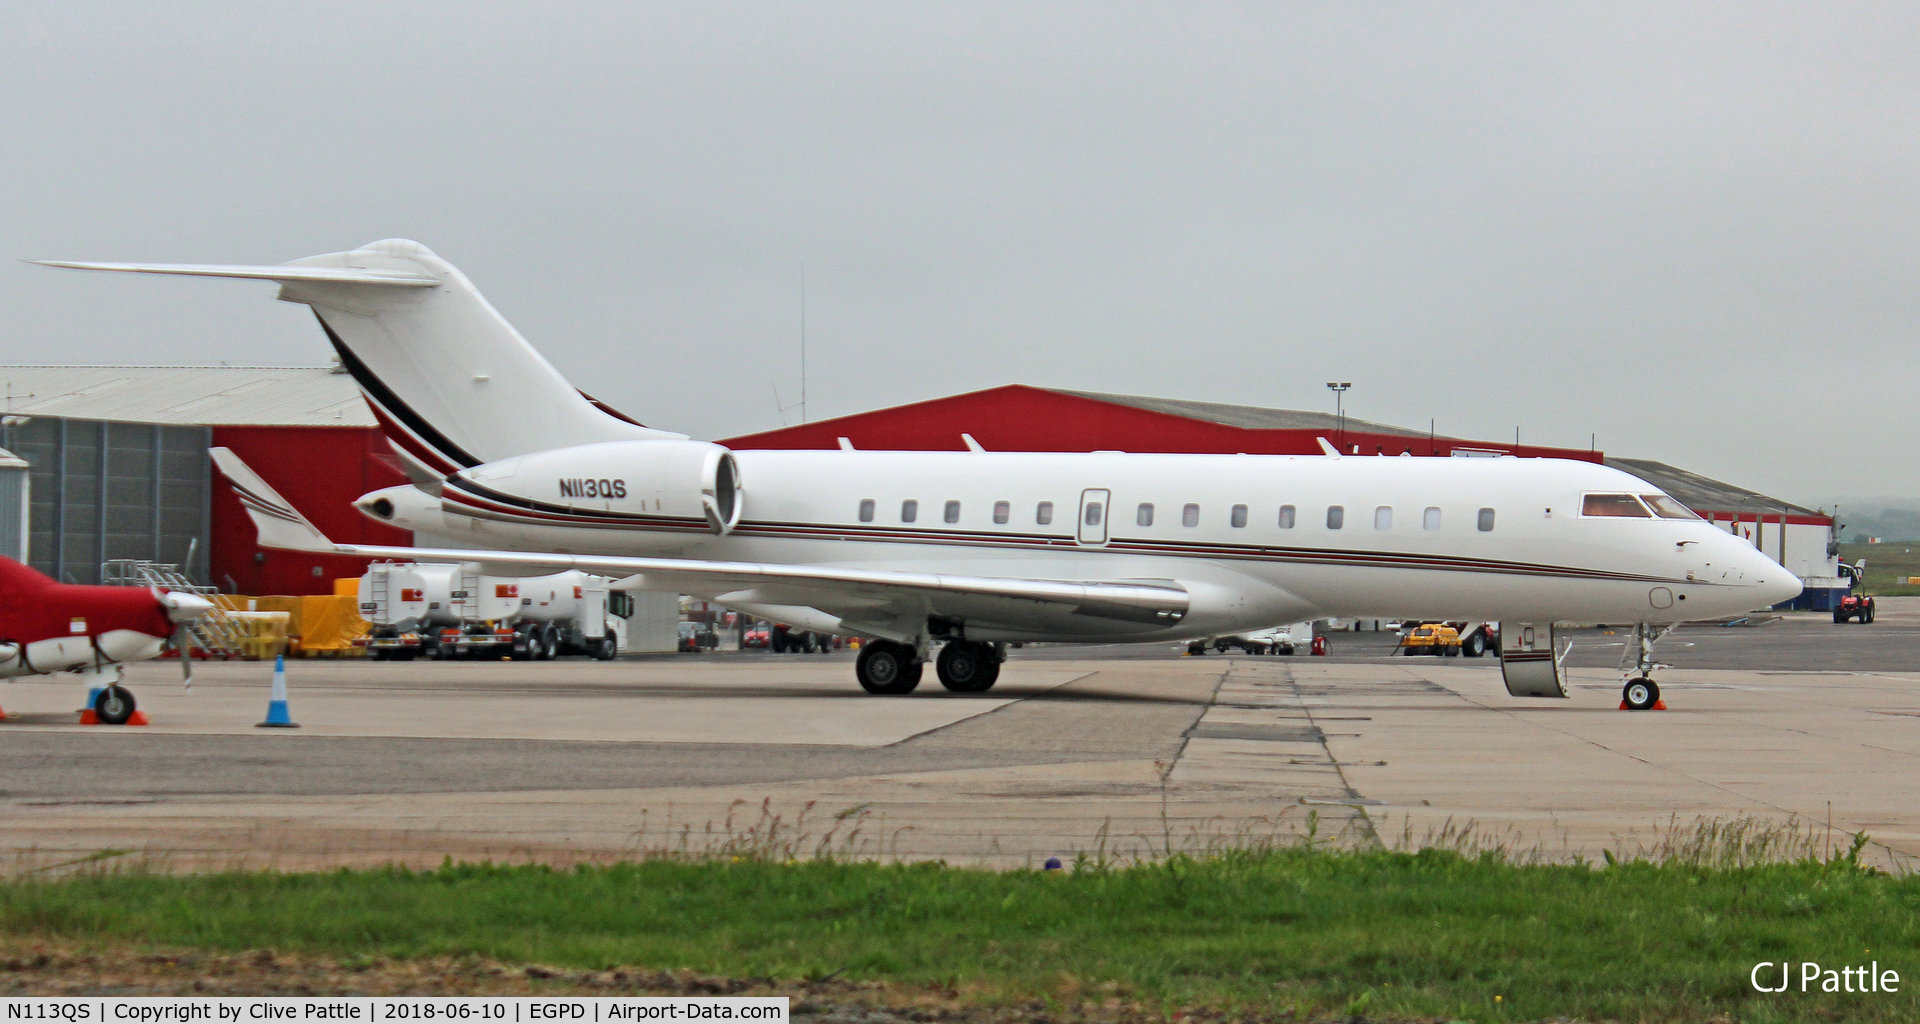 N113QS, 2016 Bombardier BD-700-1A11 Global 5000 C/N 9722, Parked at Aberdeen